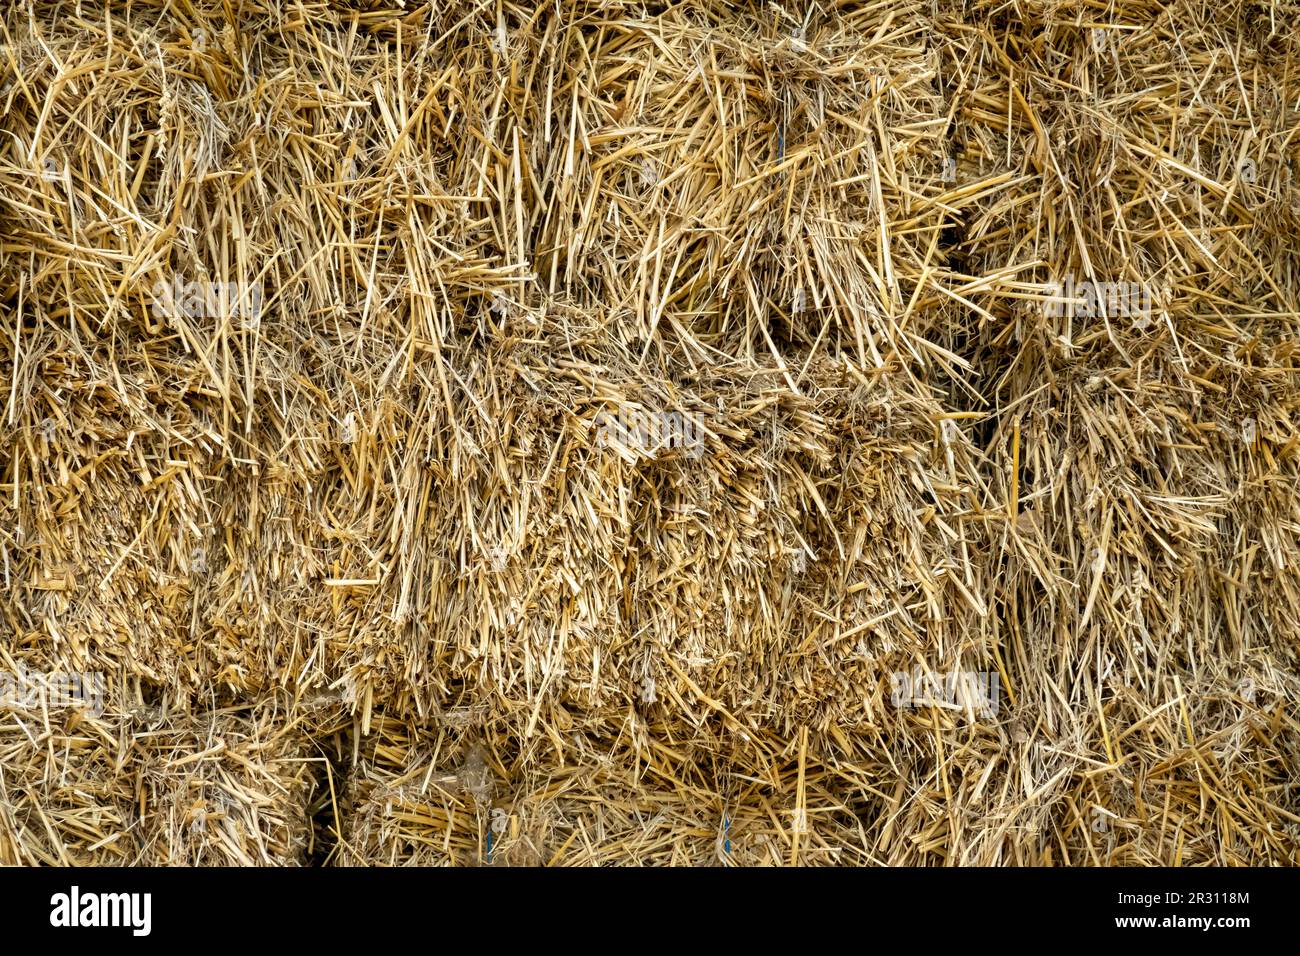 Hay bales of dried grass stacked up, feed for livestock, Netherlands Stock Photo